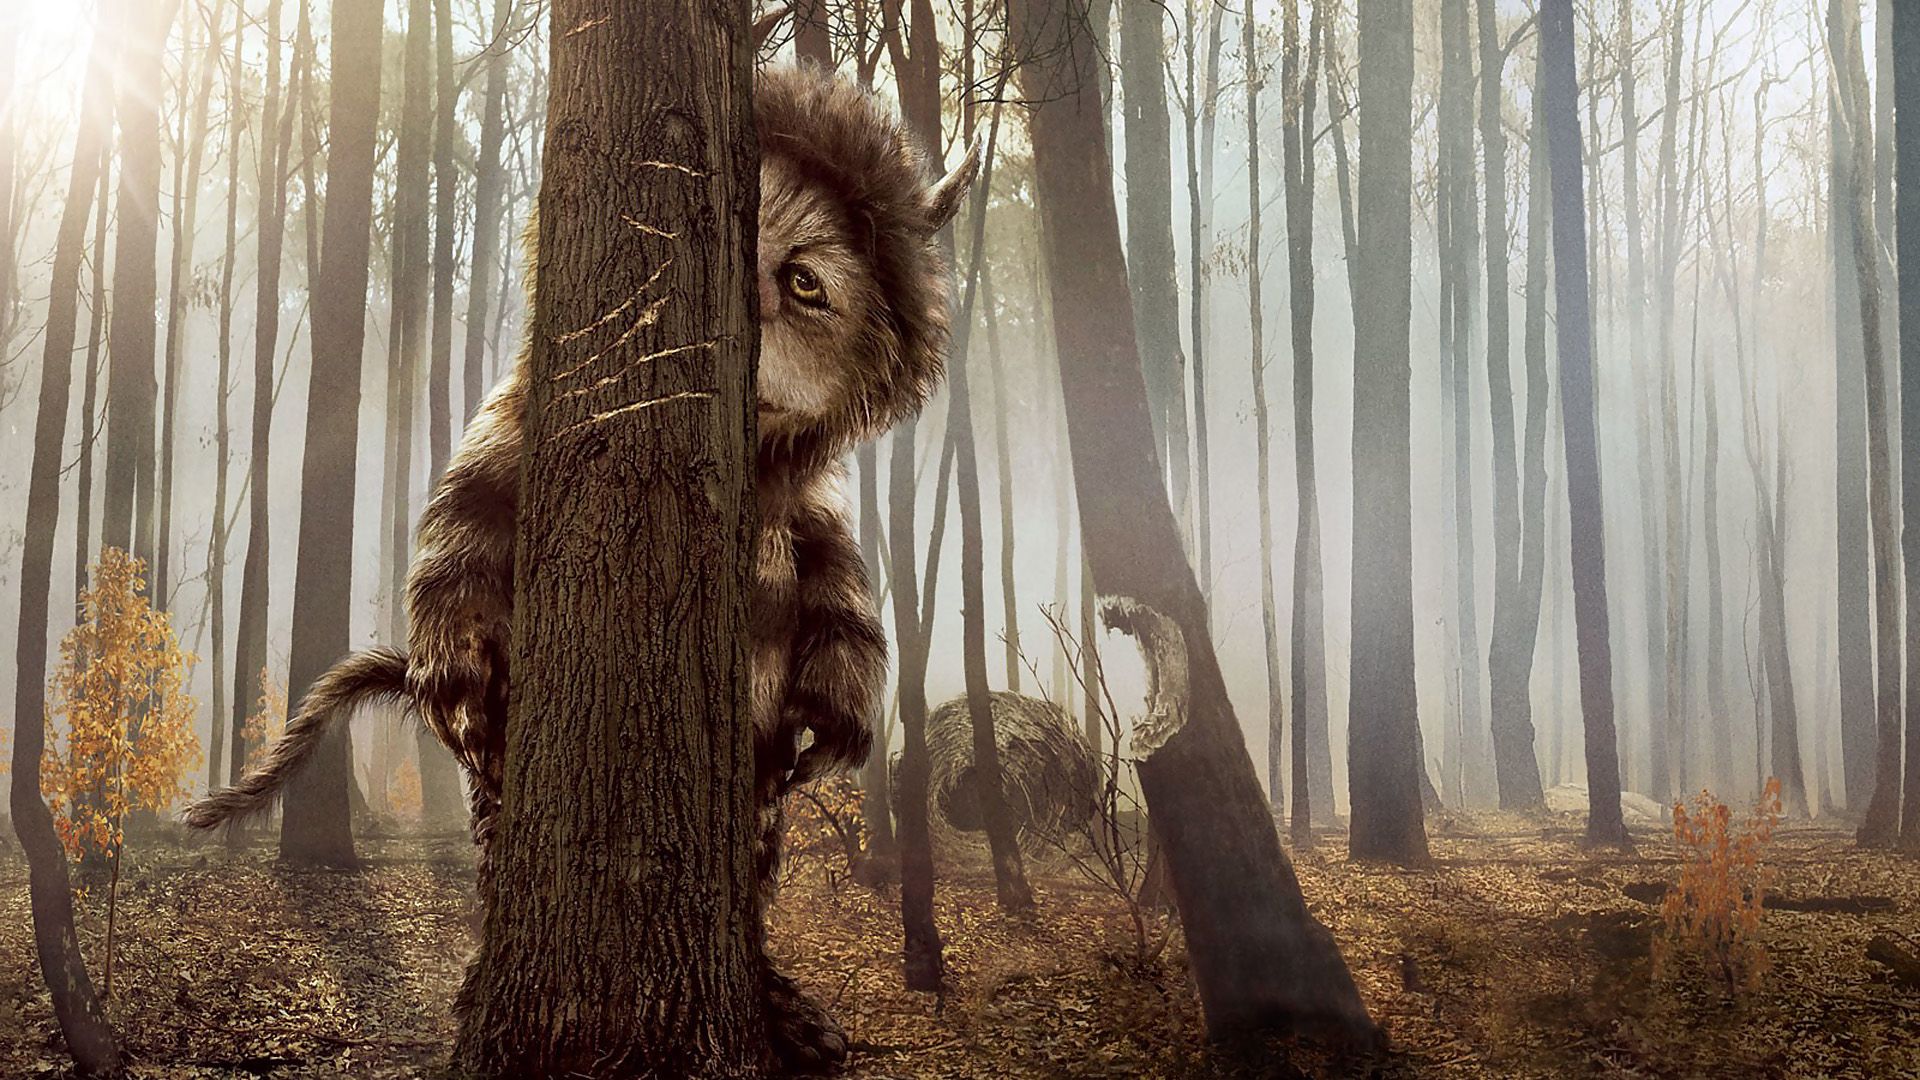 Where The Wild Things Are HD Wallpaperx1080